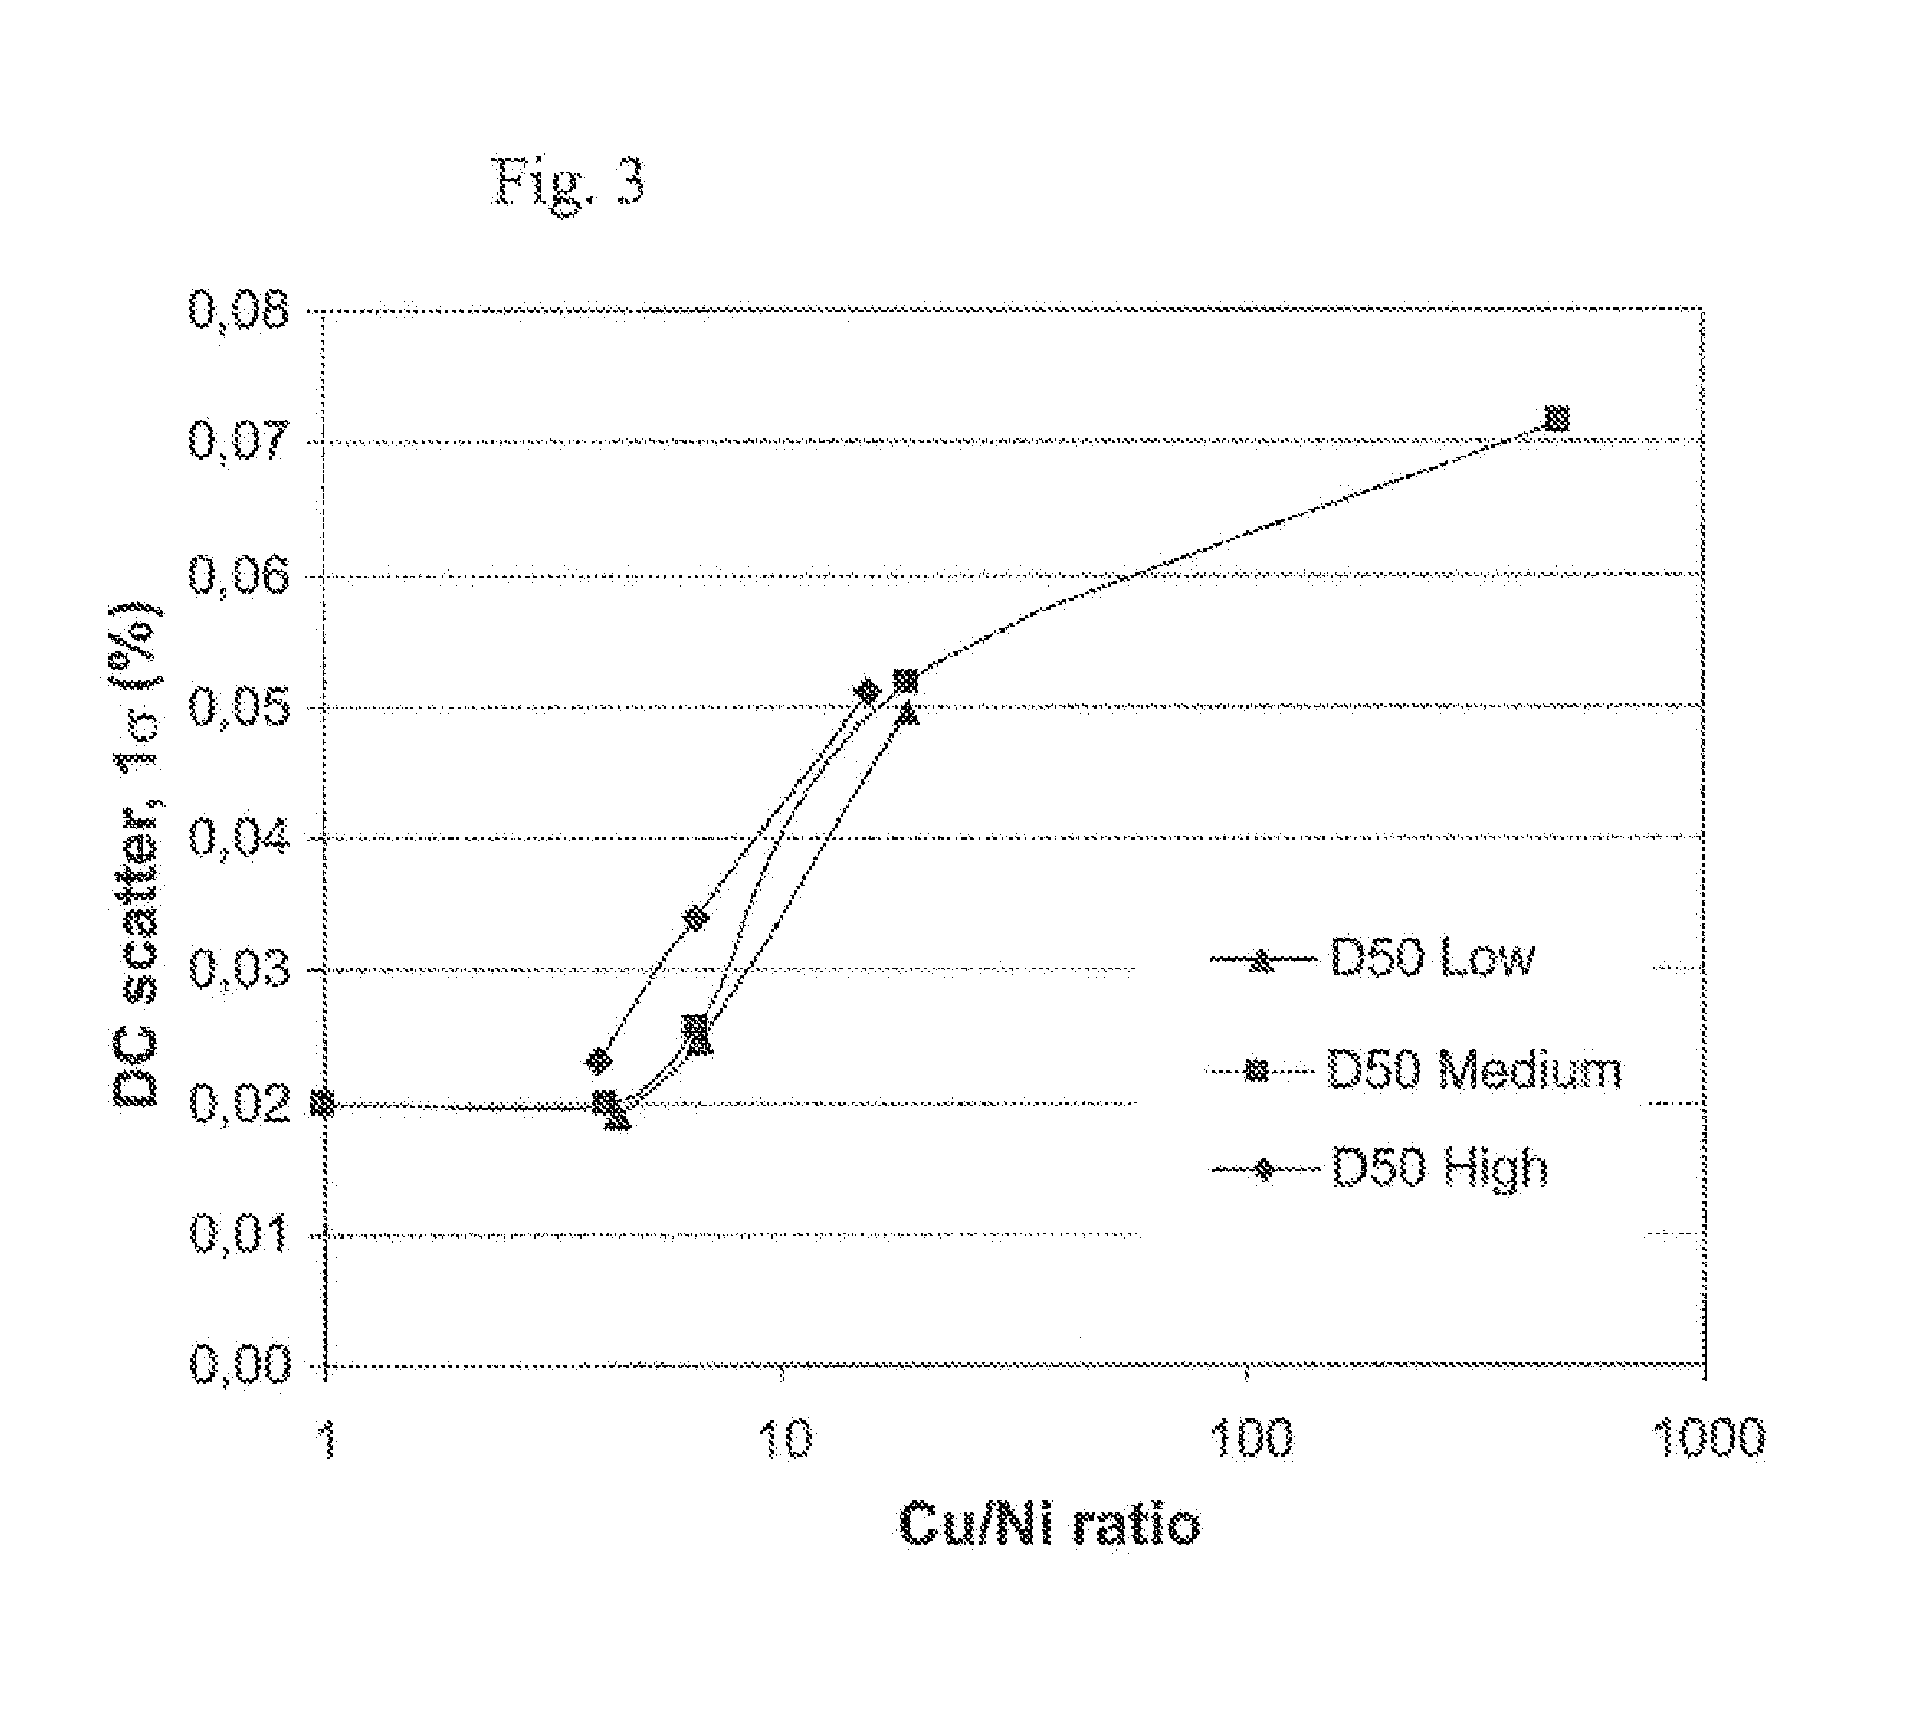 Method of producing a diffusion alloyed iron or iron-based powder, a diffusion alloyed powder, a composition including the diffusion alloyed powder, and a compacted and sintered part produced from the composition